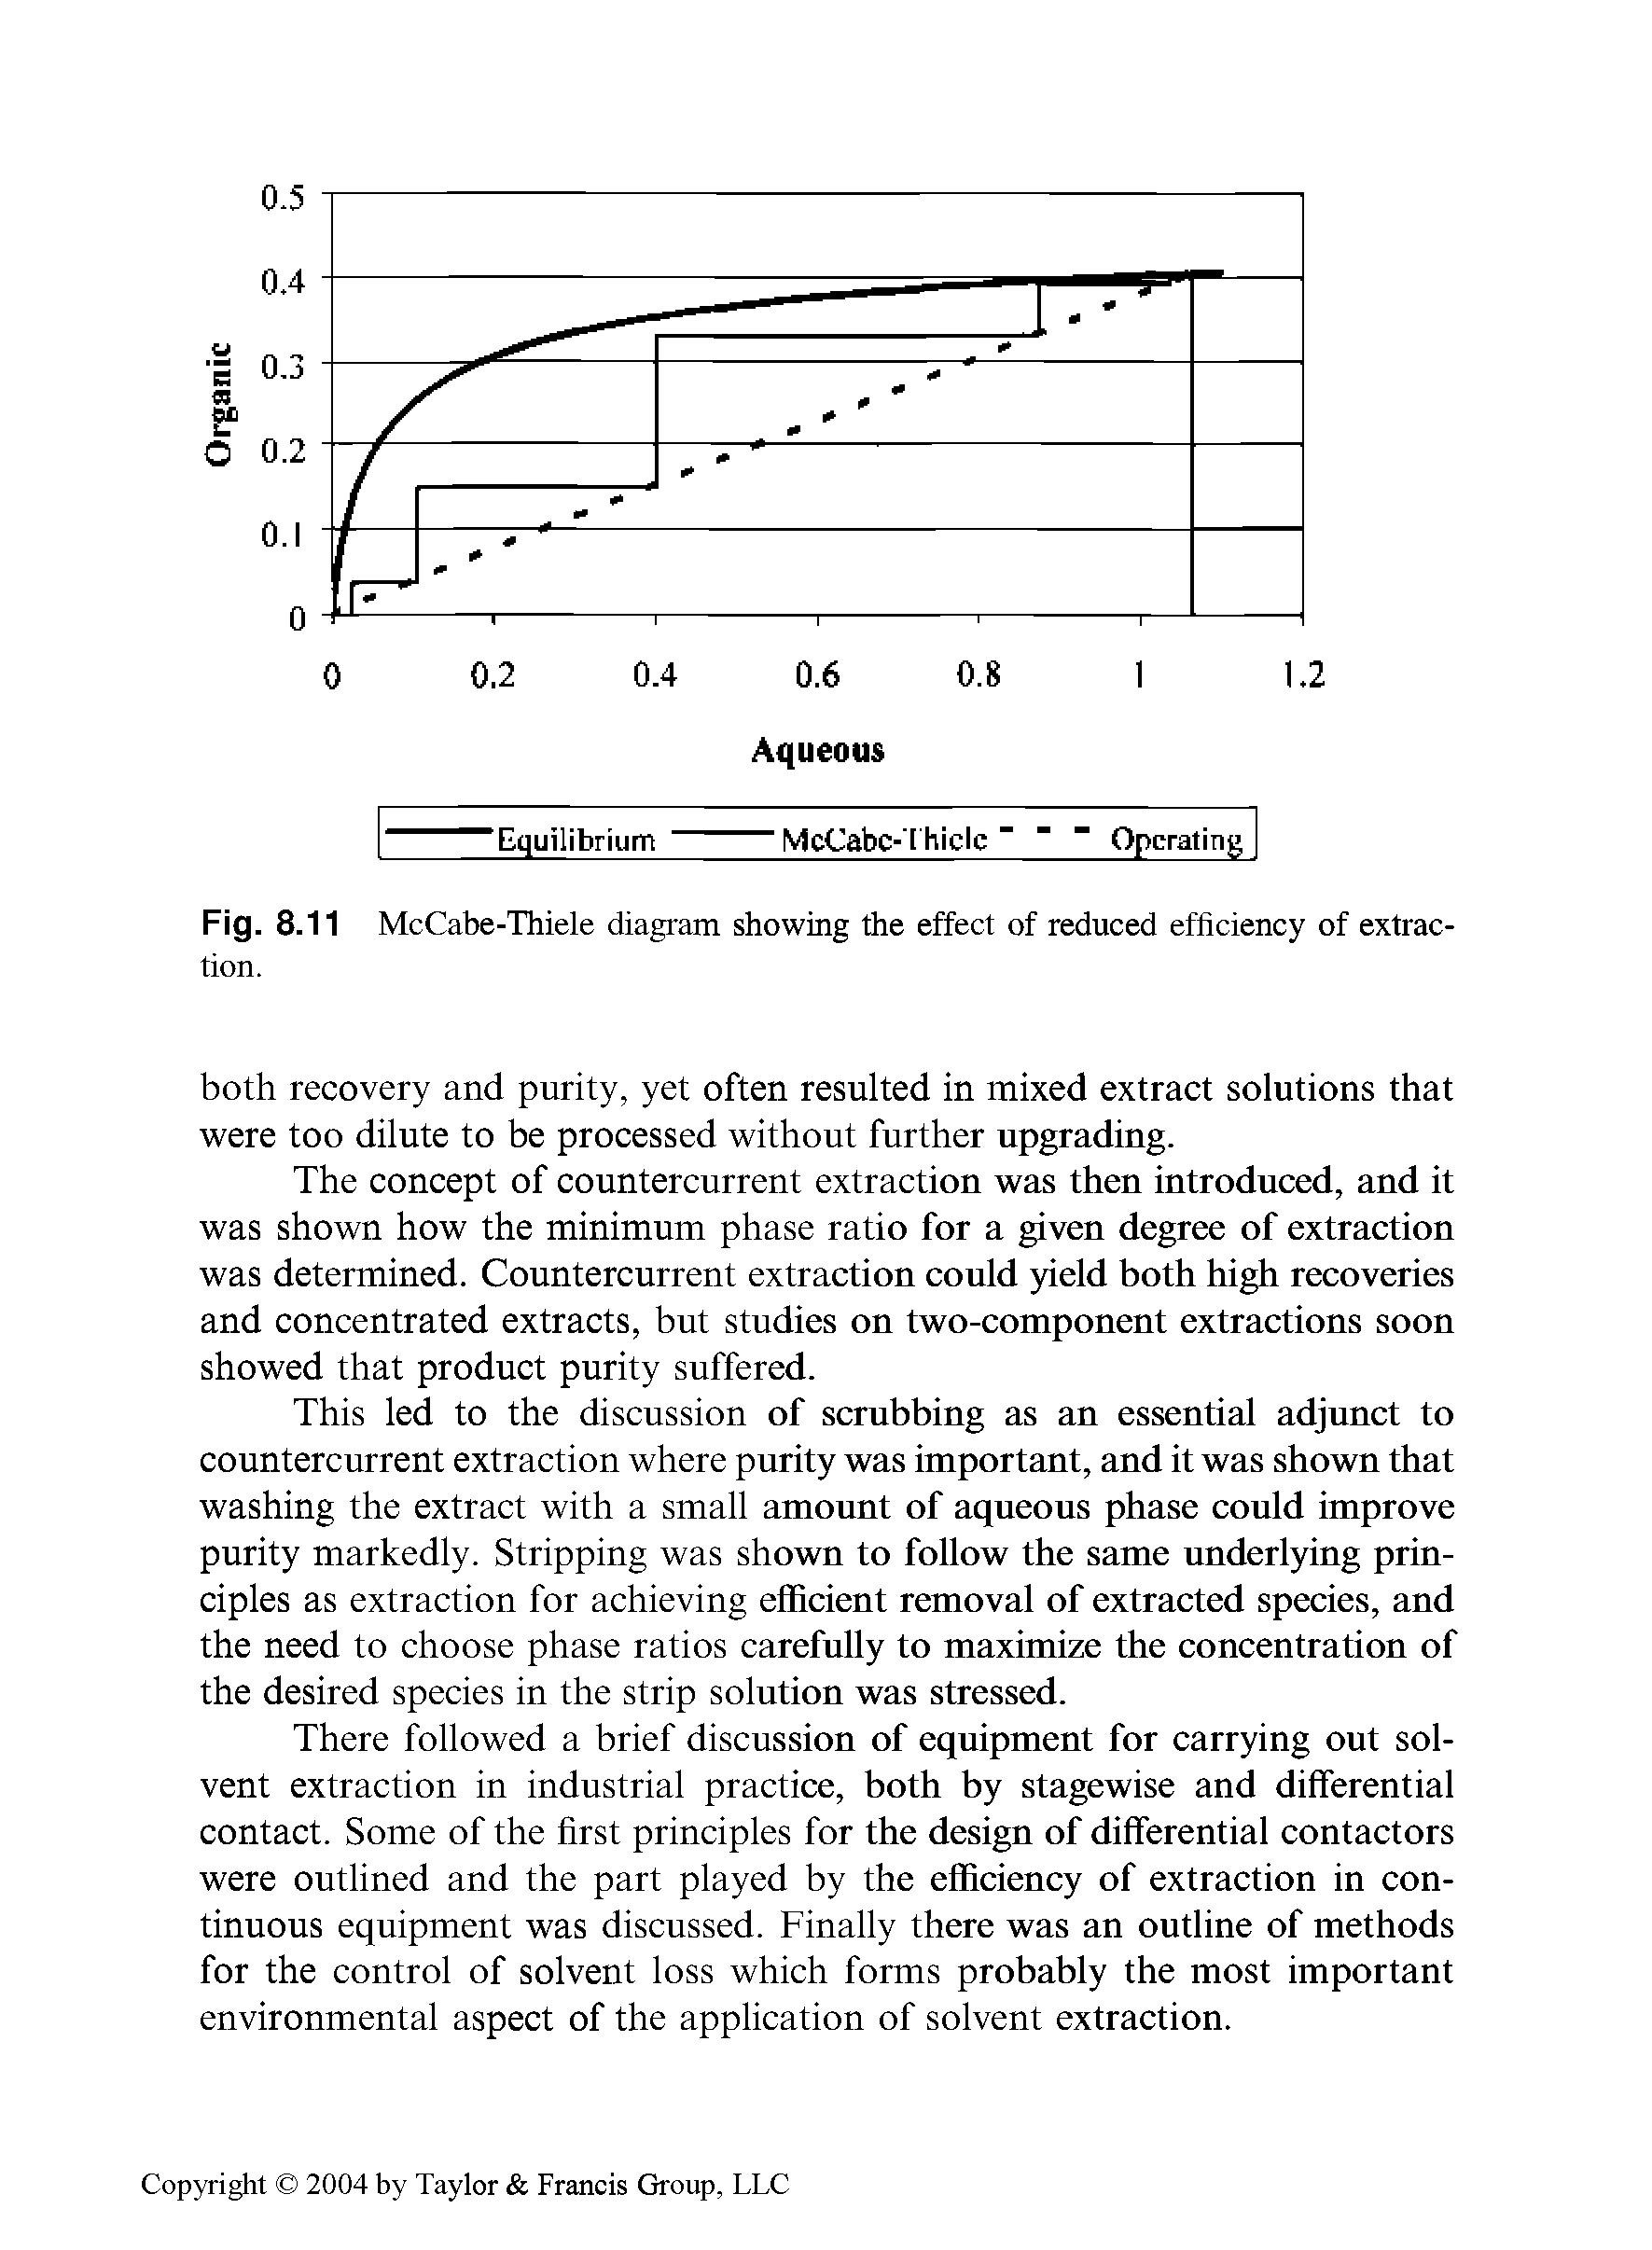 Fig. 8.11 McCabe-Thiele diagram showing the effect of reduced efficiency of extraction.